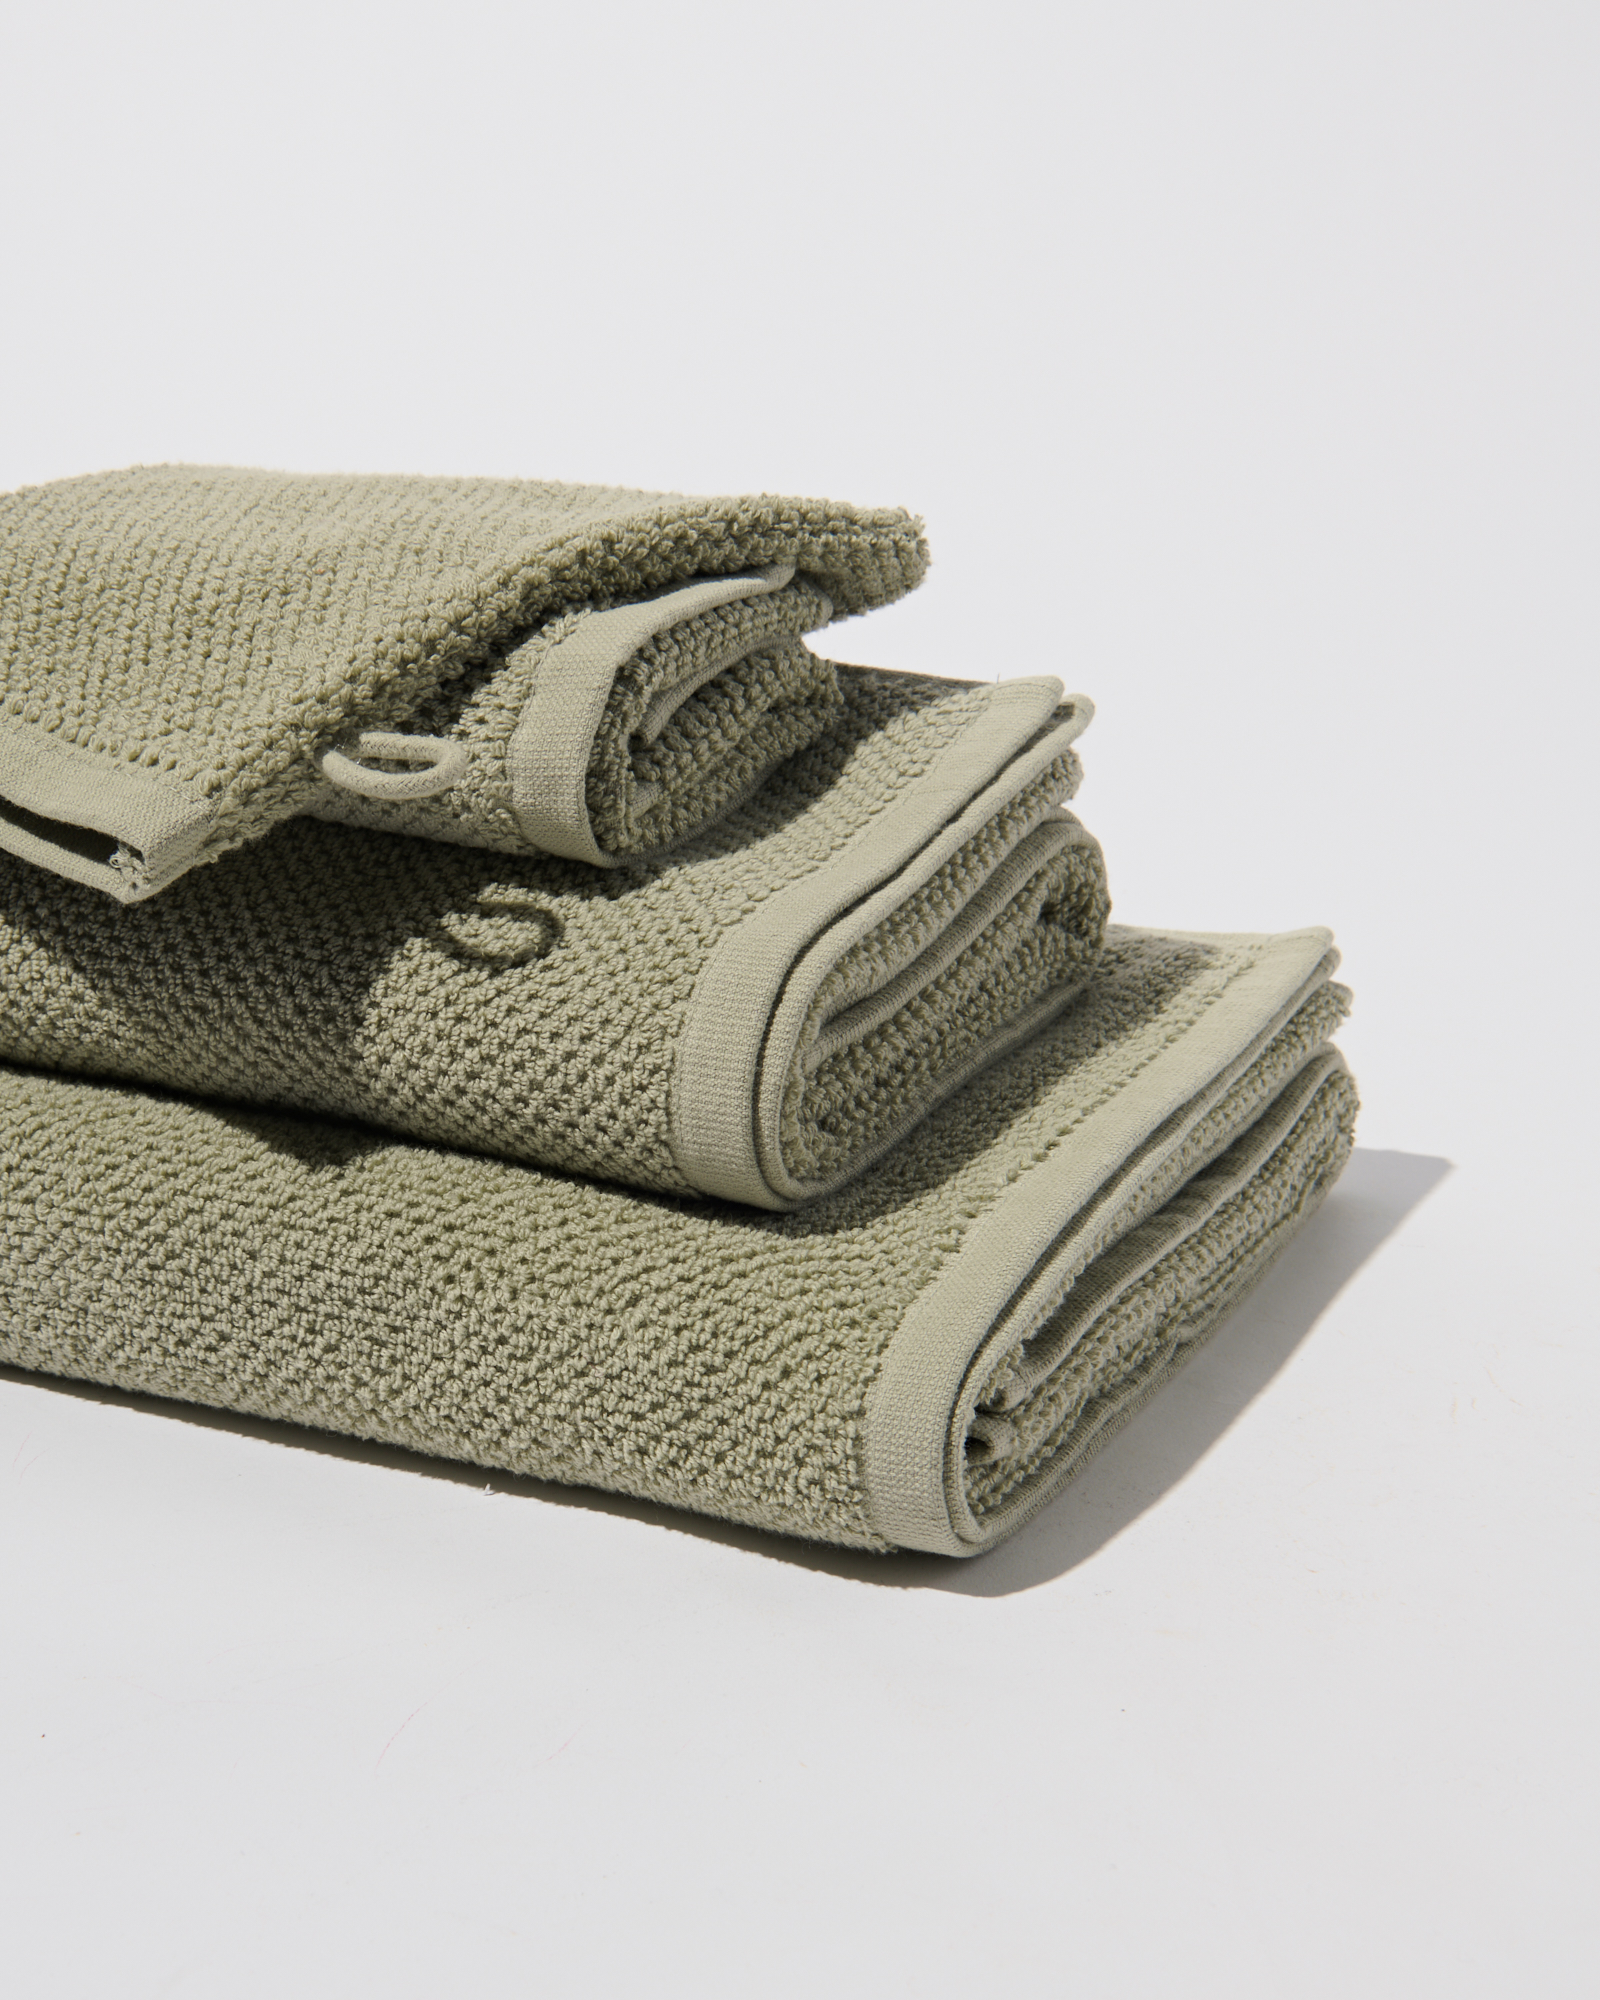 Group of Towels, so you can see the different sizes. In a green colour